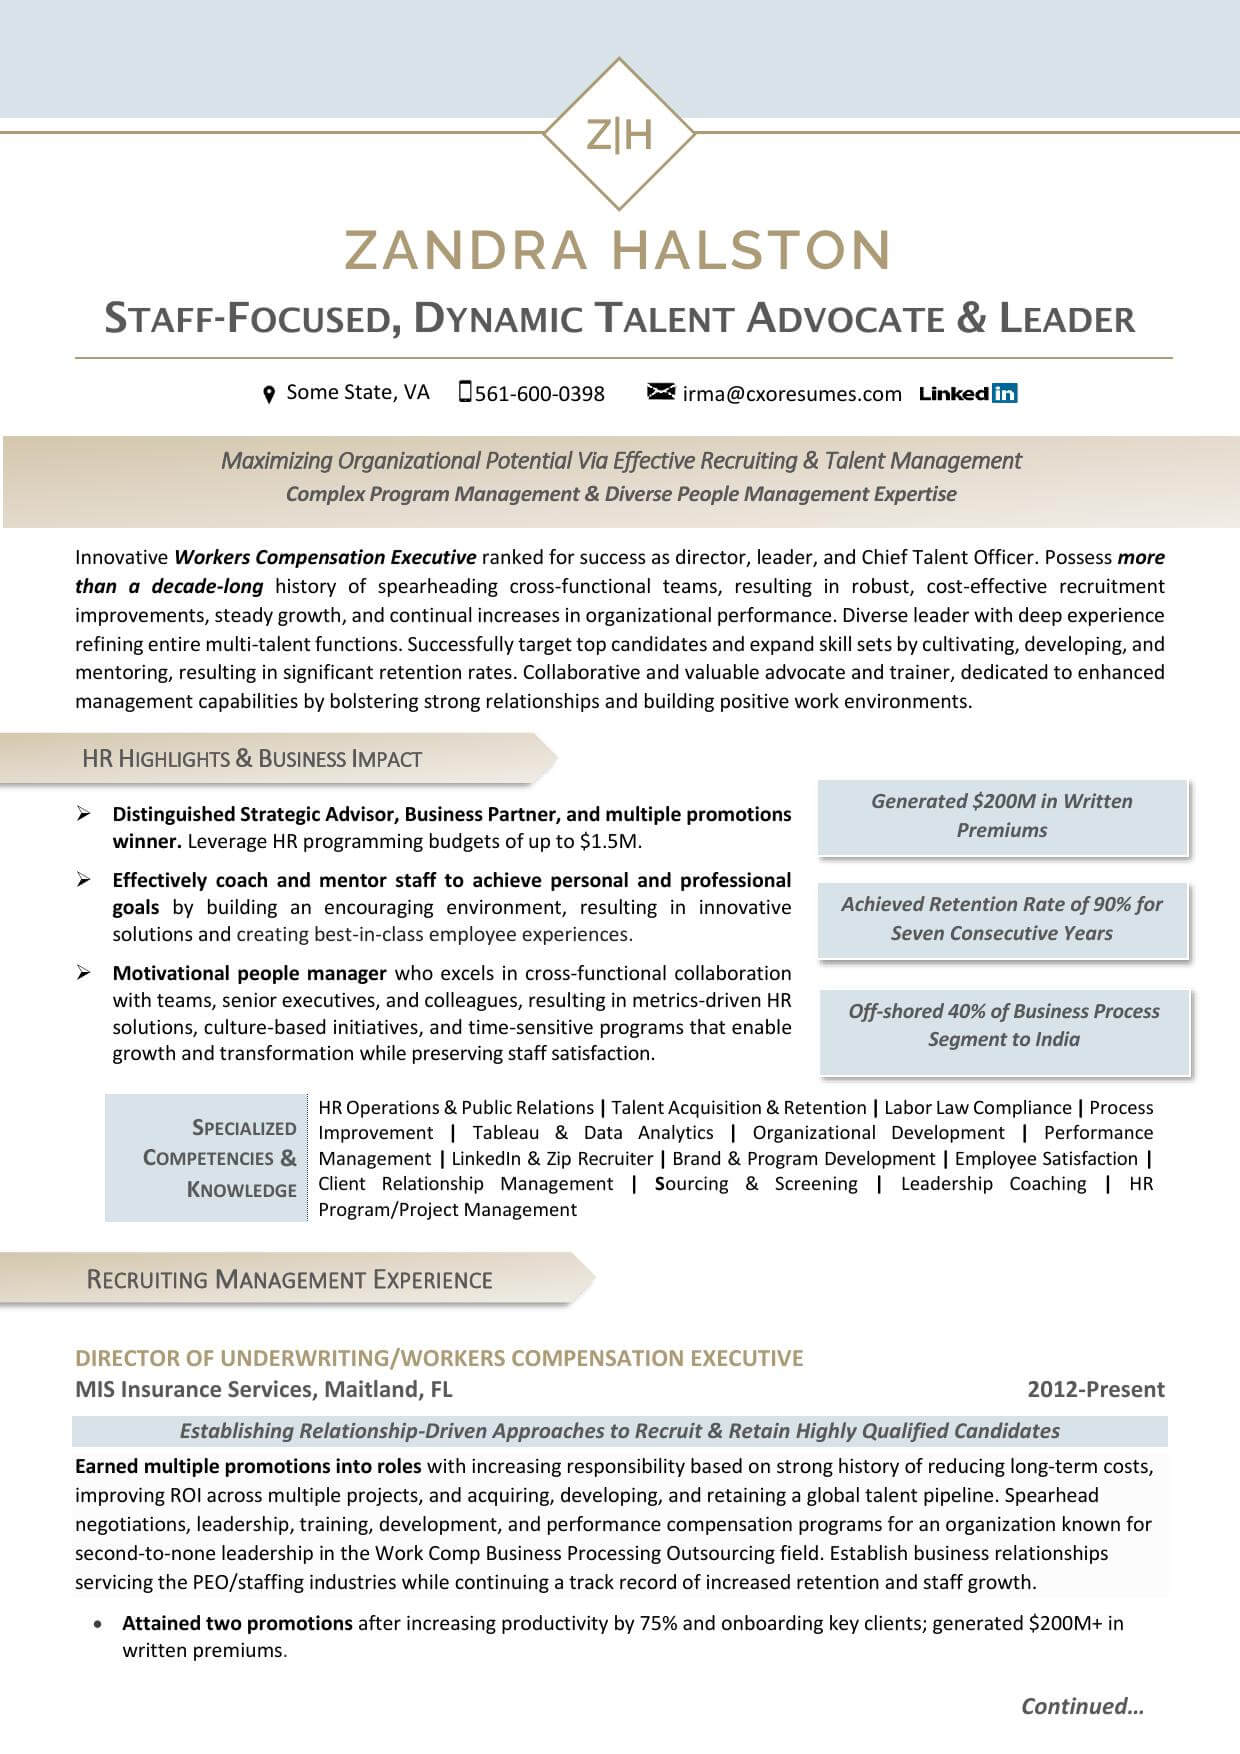 TALENT ADVOCATE & LEADER (1)